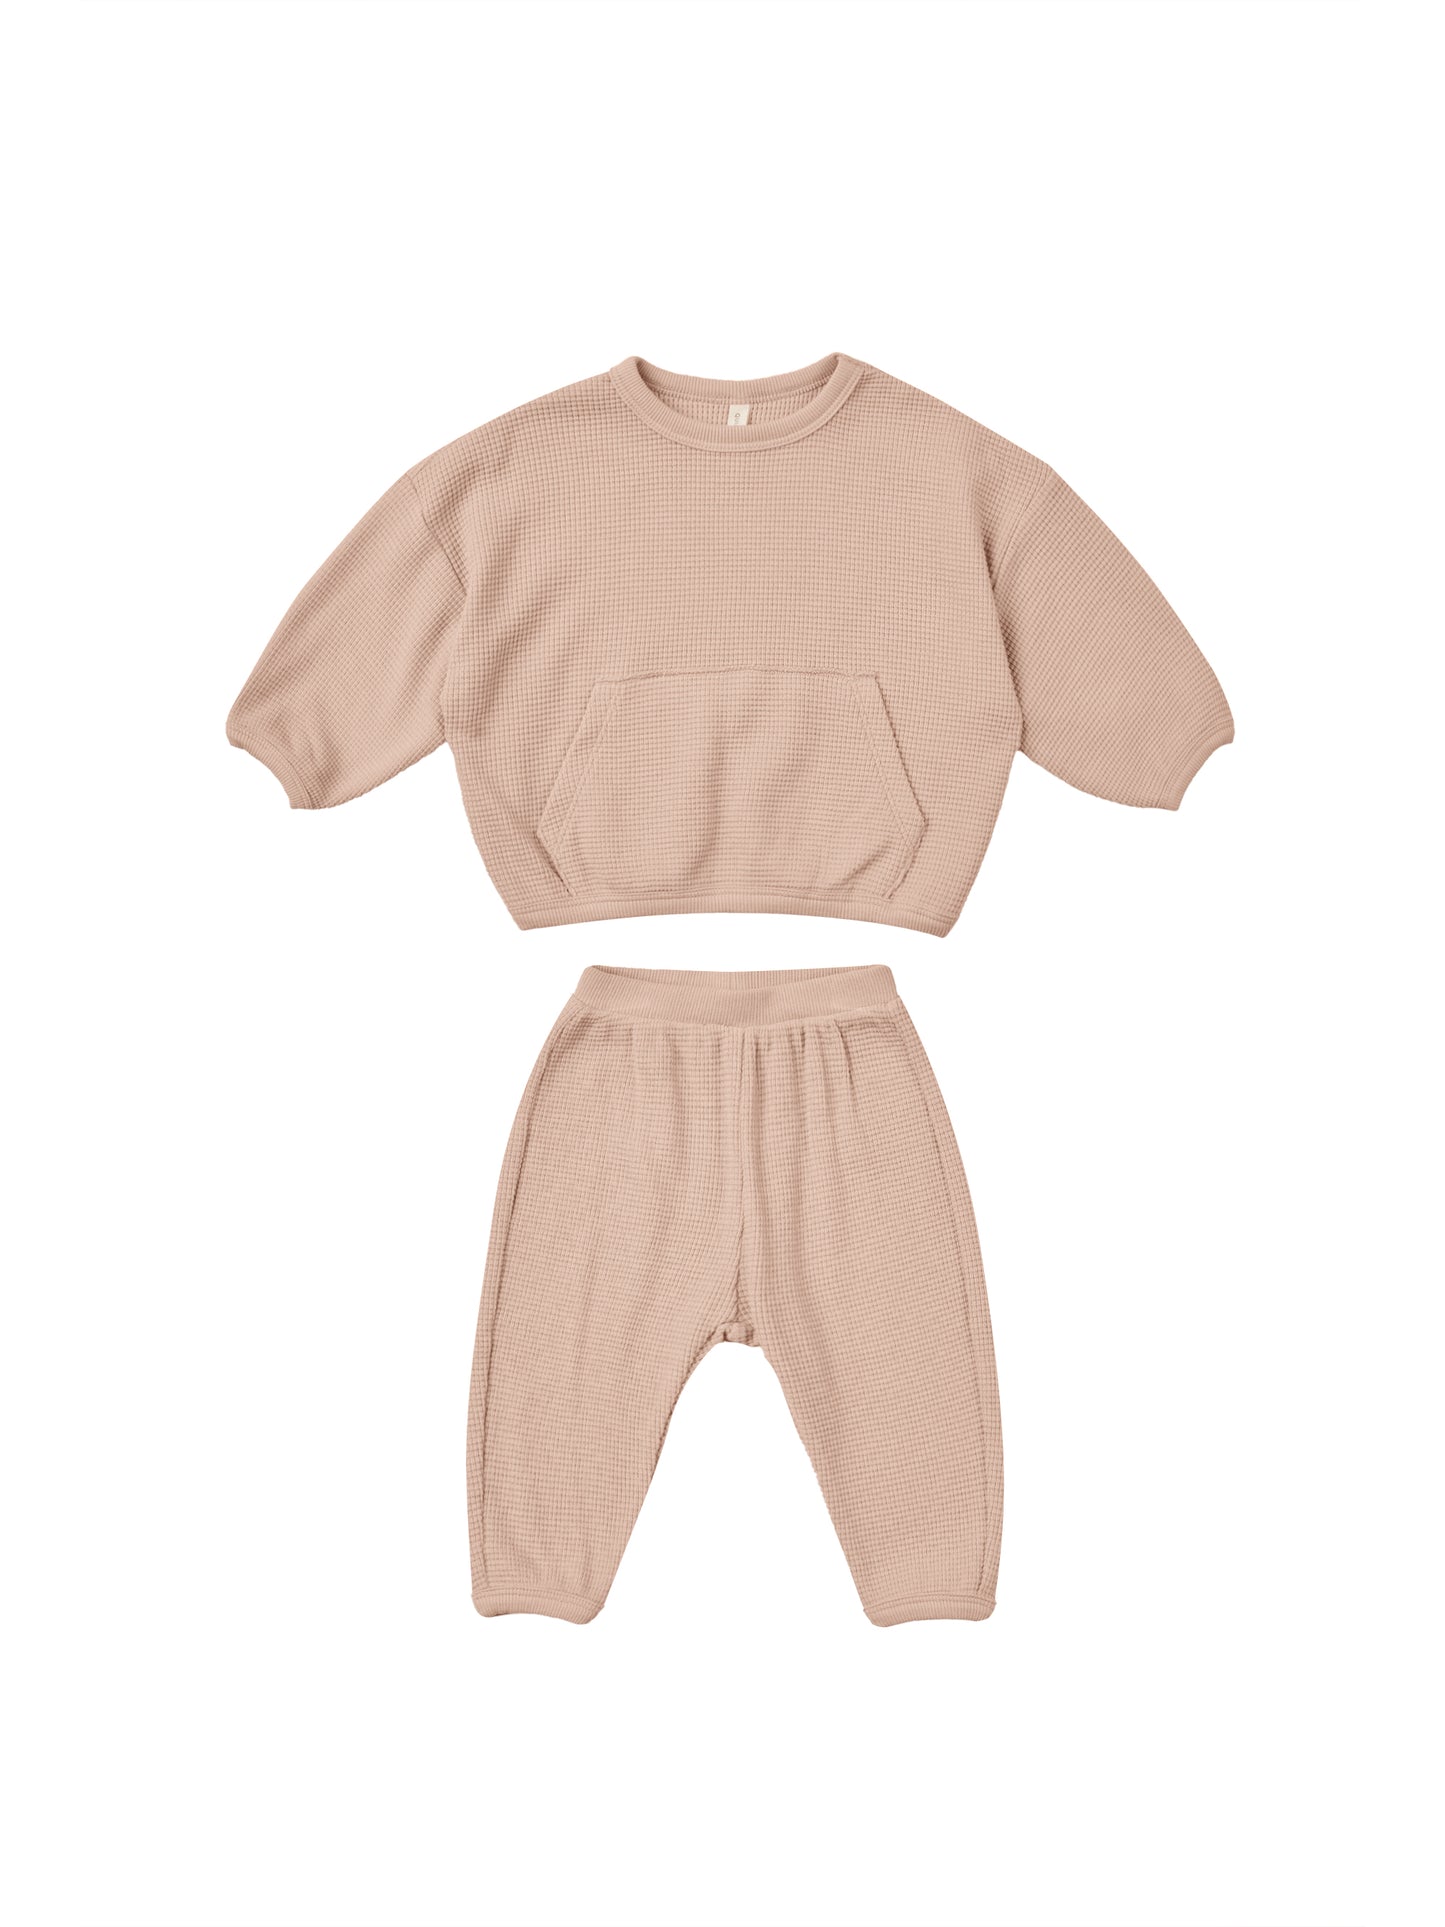 Quincy Mae wrap top + footed pant set || blush